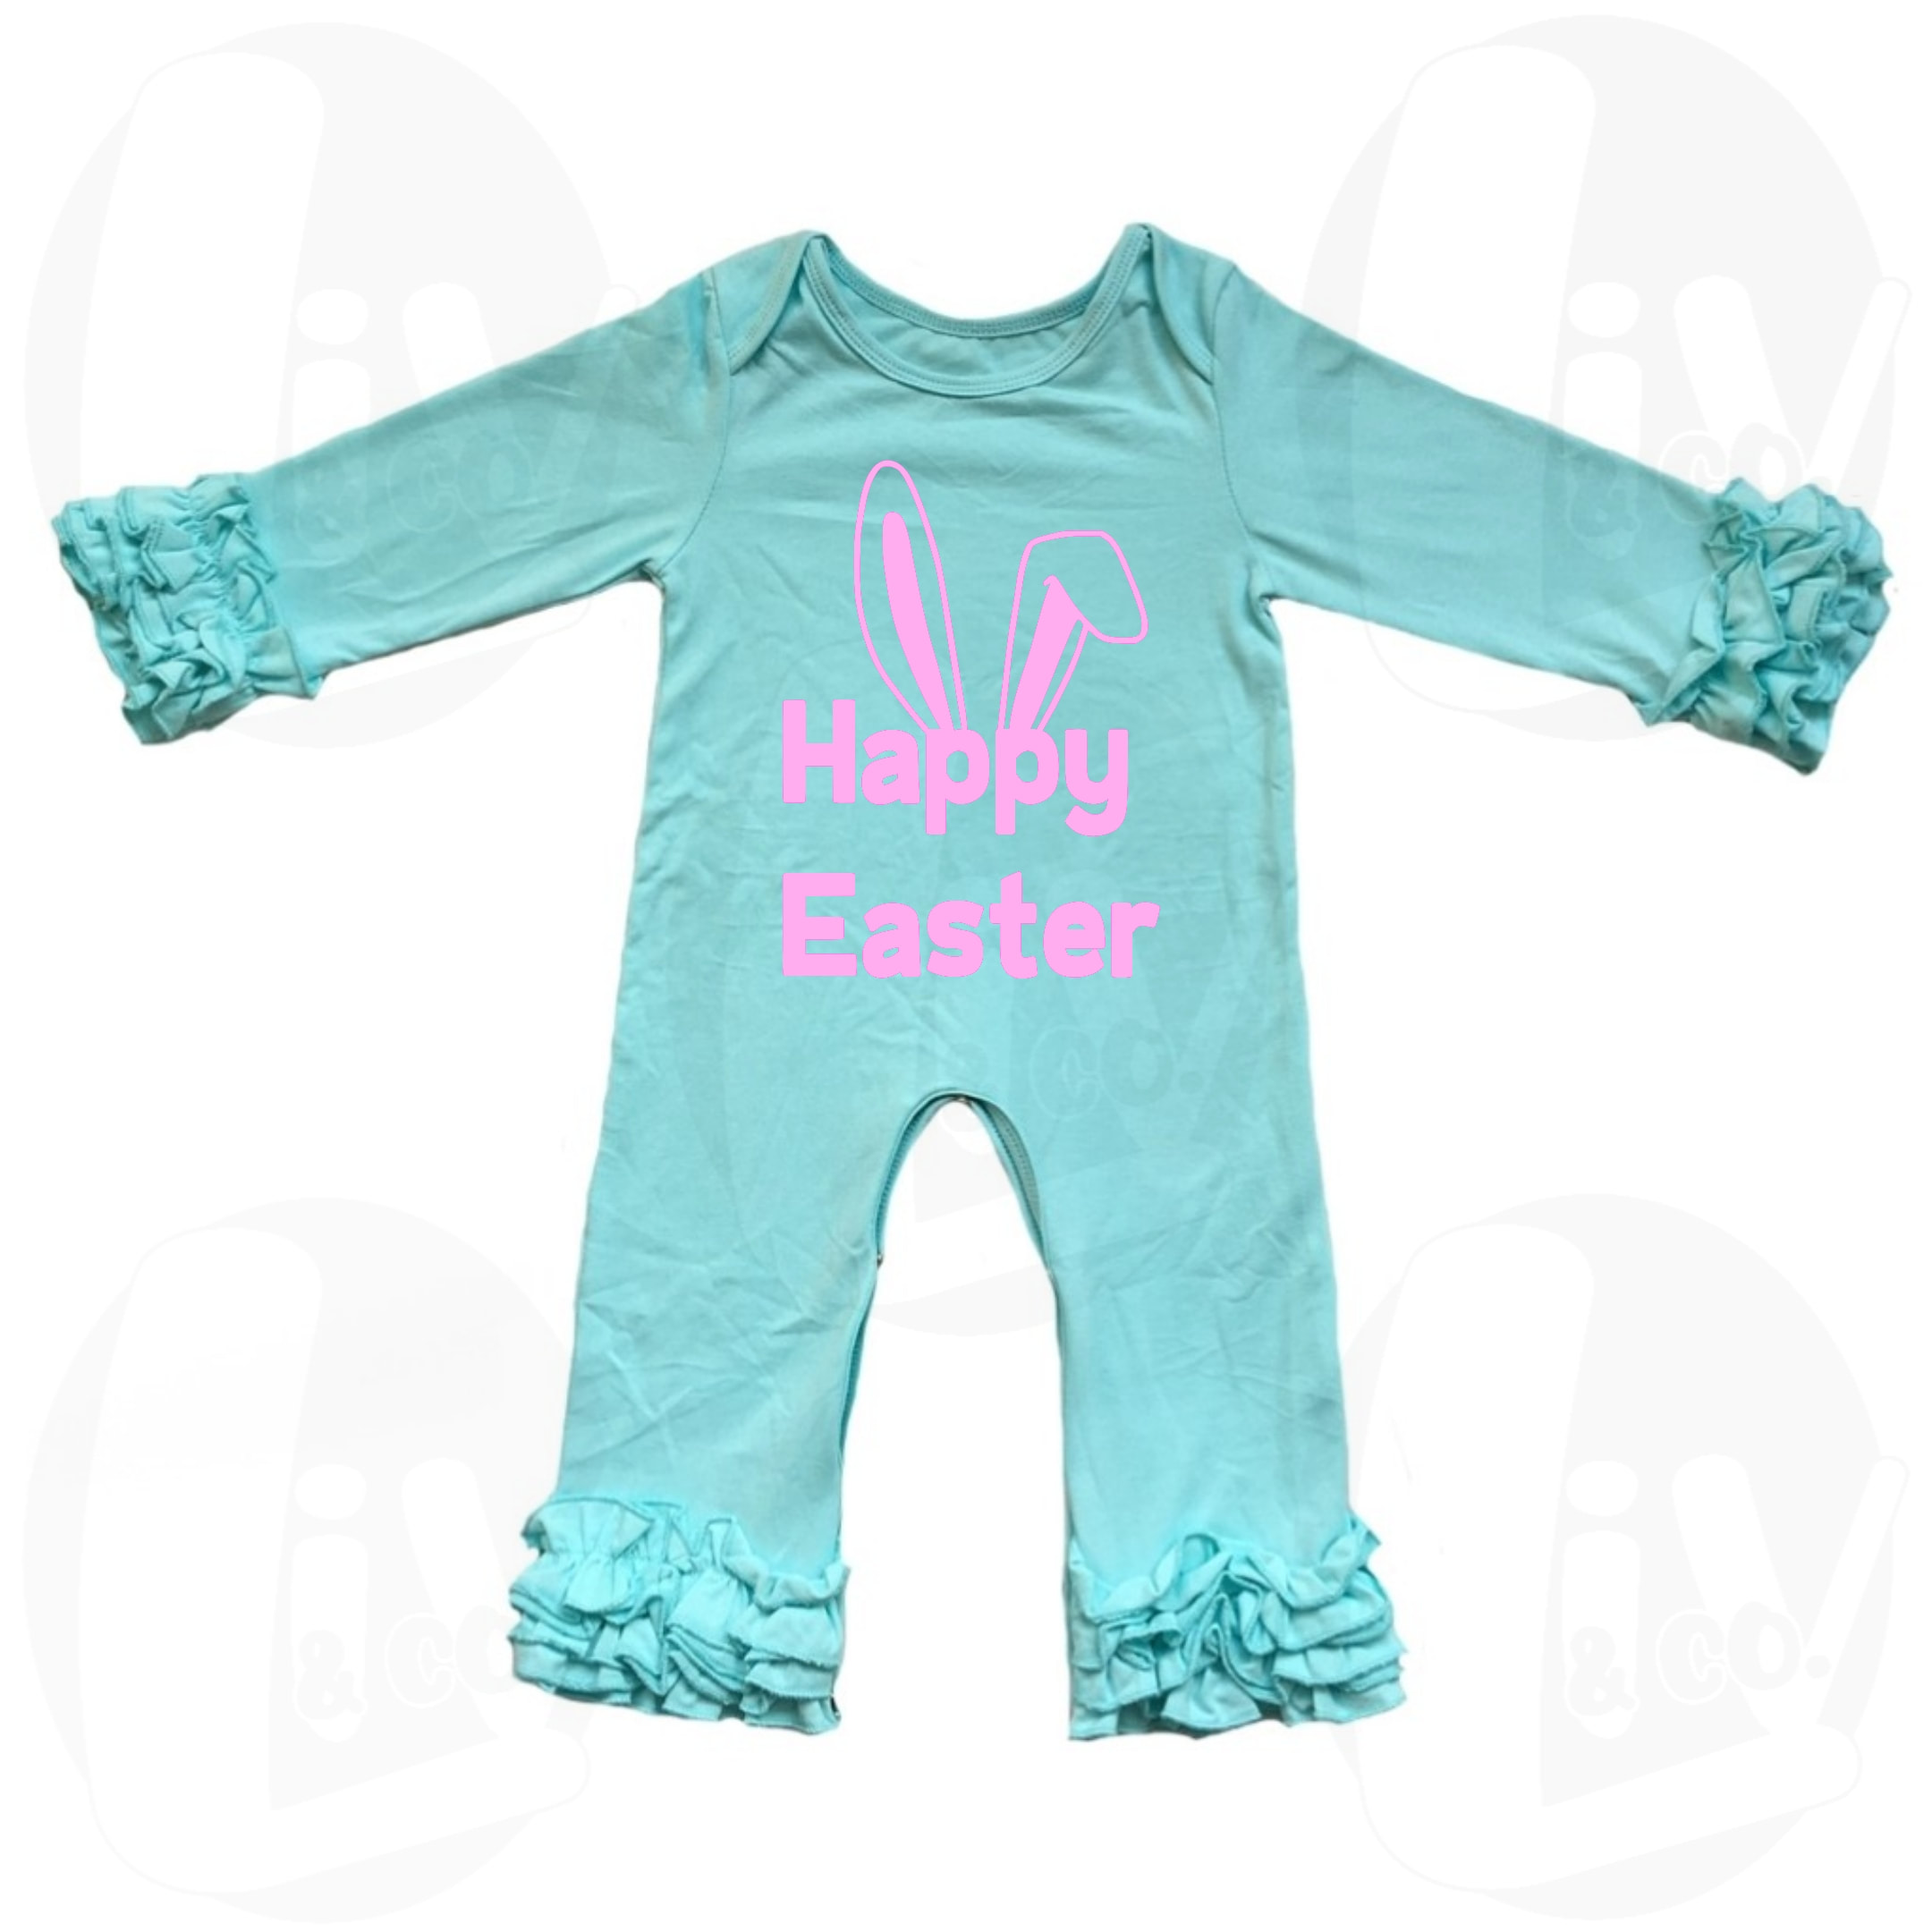 Baby Bodysuit Happy Easter Mint and Blue